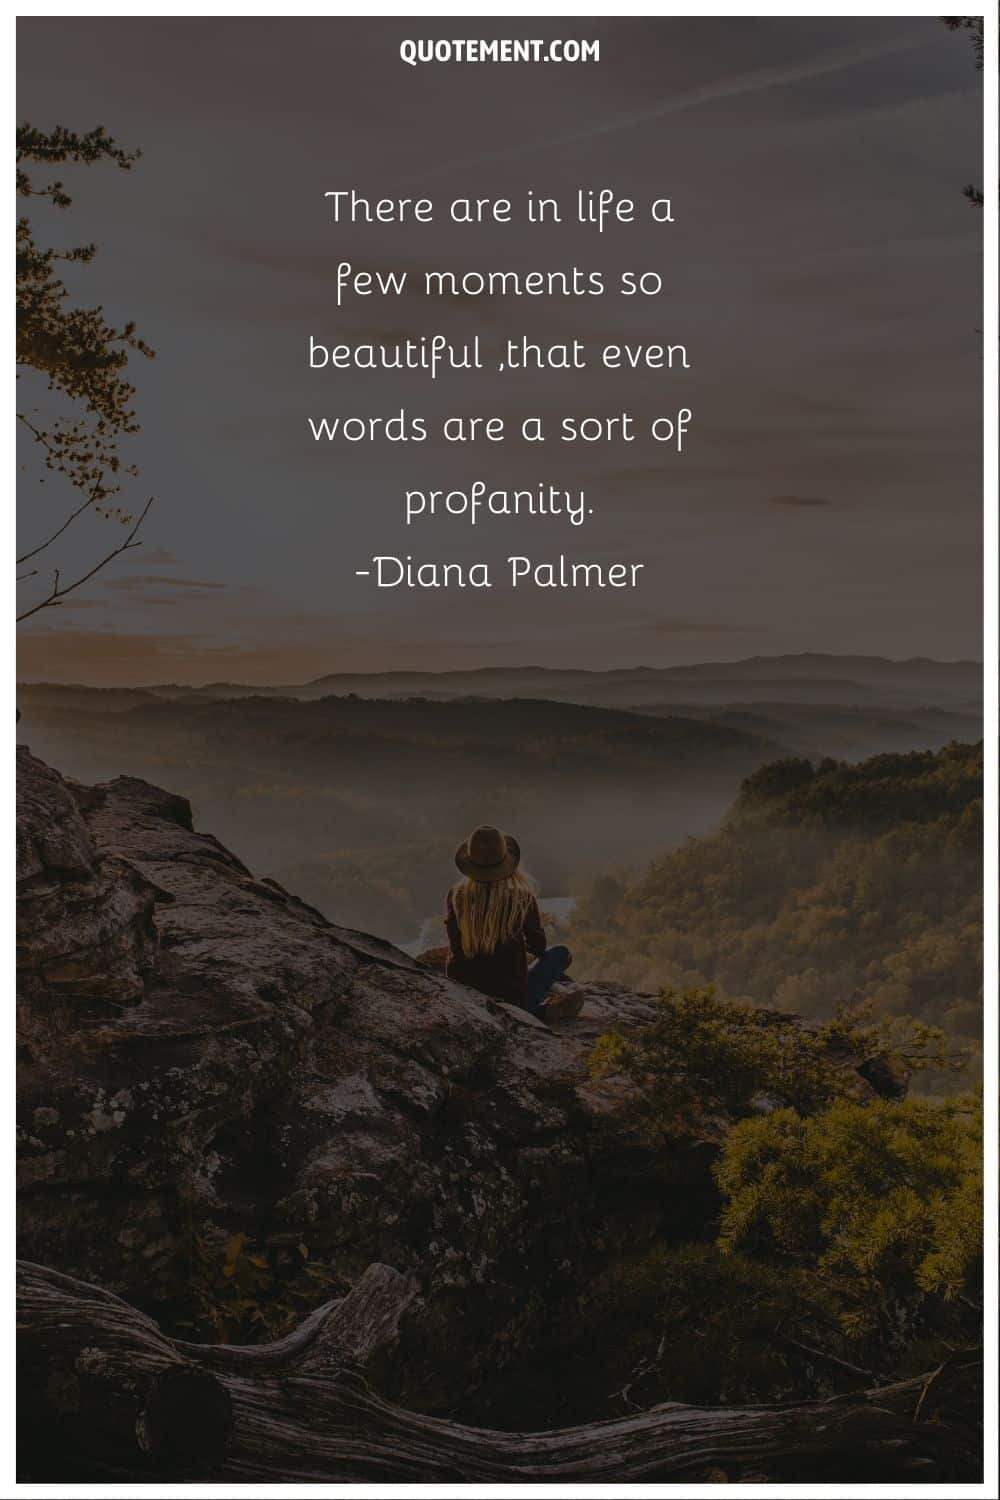 “There are in life a few moments so beautiful ,that even words are a sort of profanity.” ― Diana Palmer